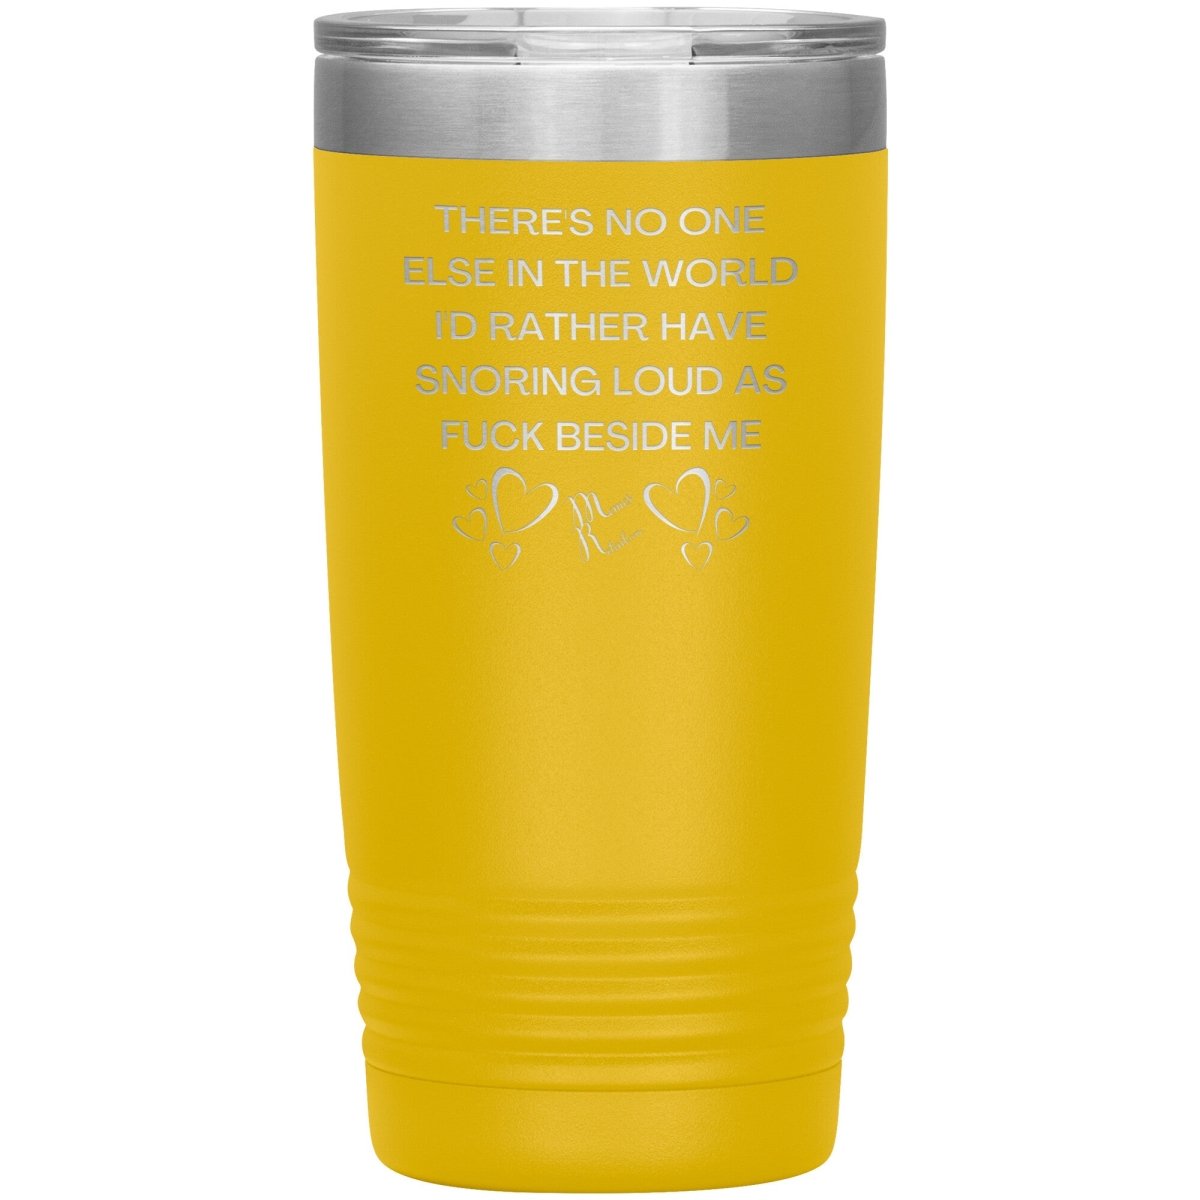 There's No One Else in the World I'd Rather Have Snoring Loud, 20oz Insulated Tumbler / Yellow - MemesRetail.com